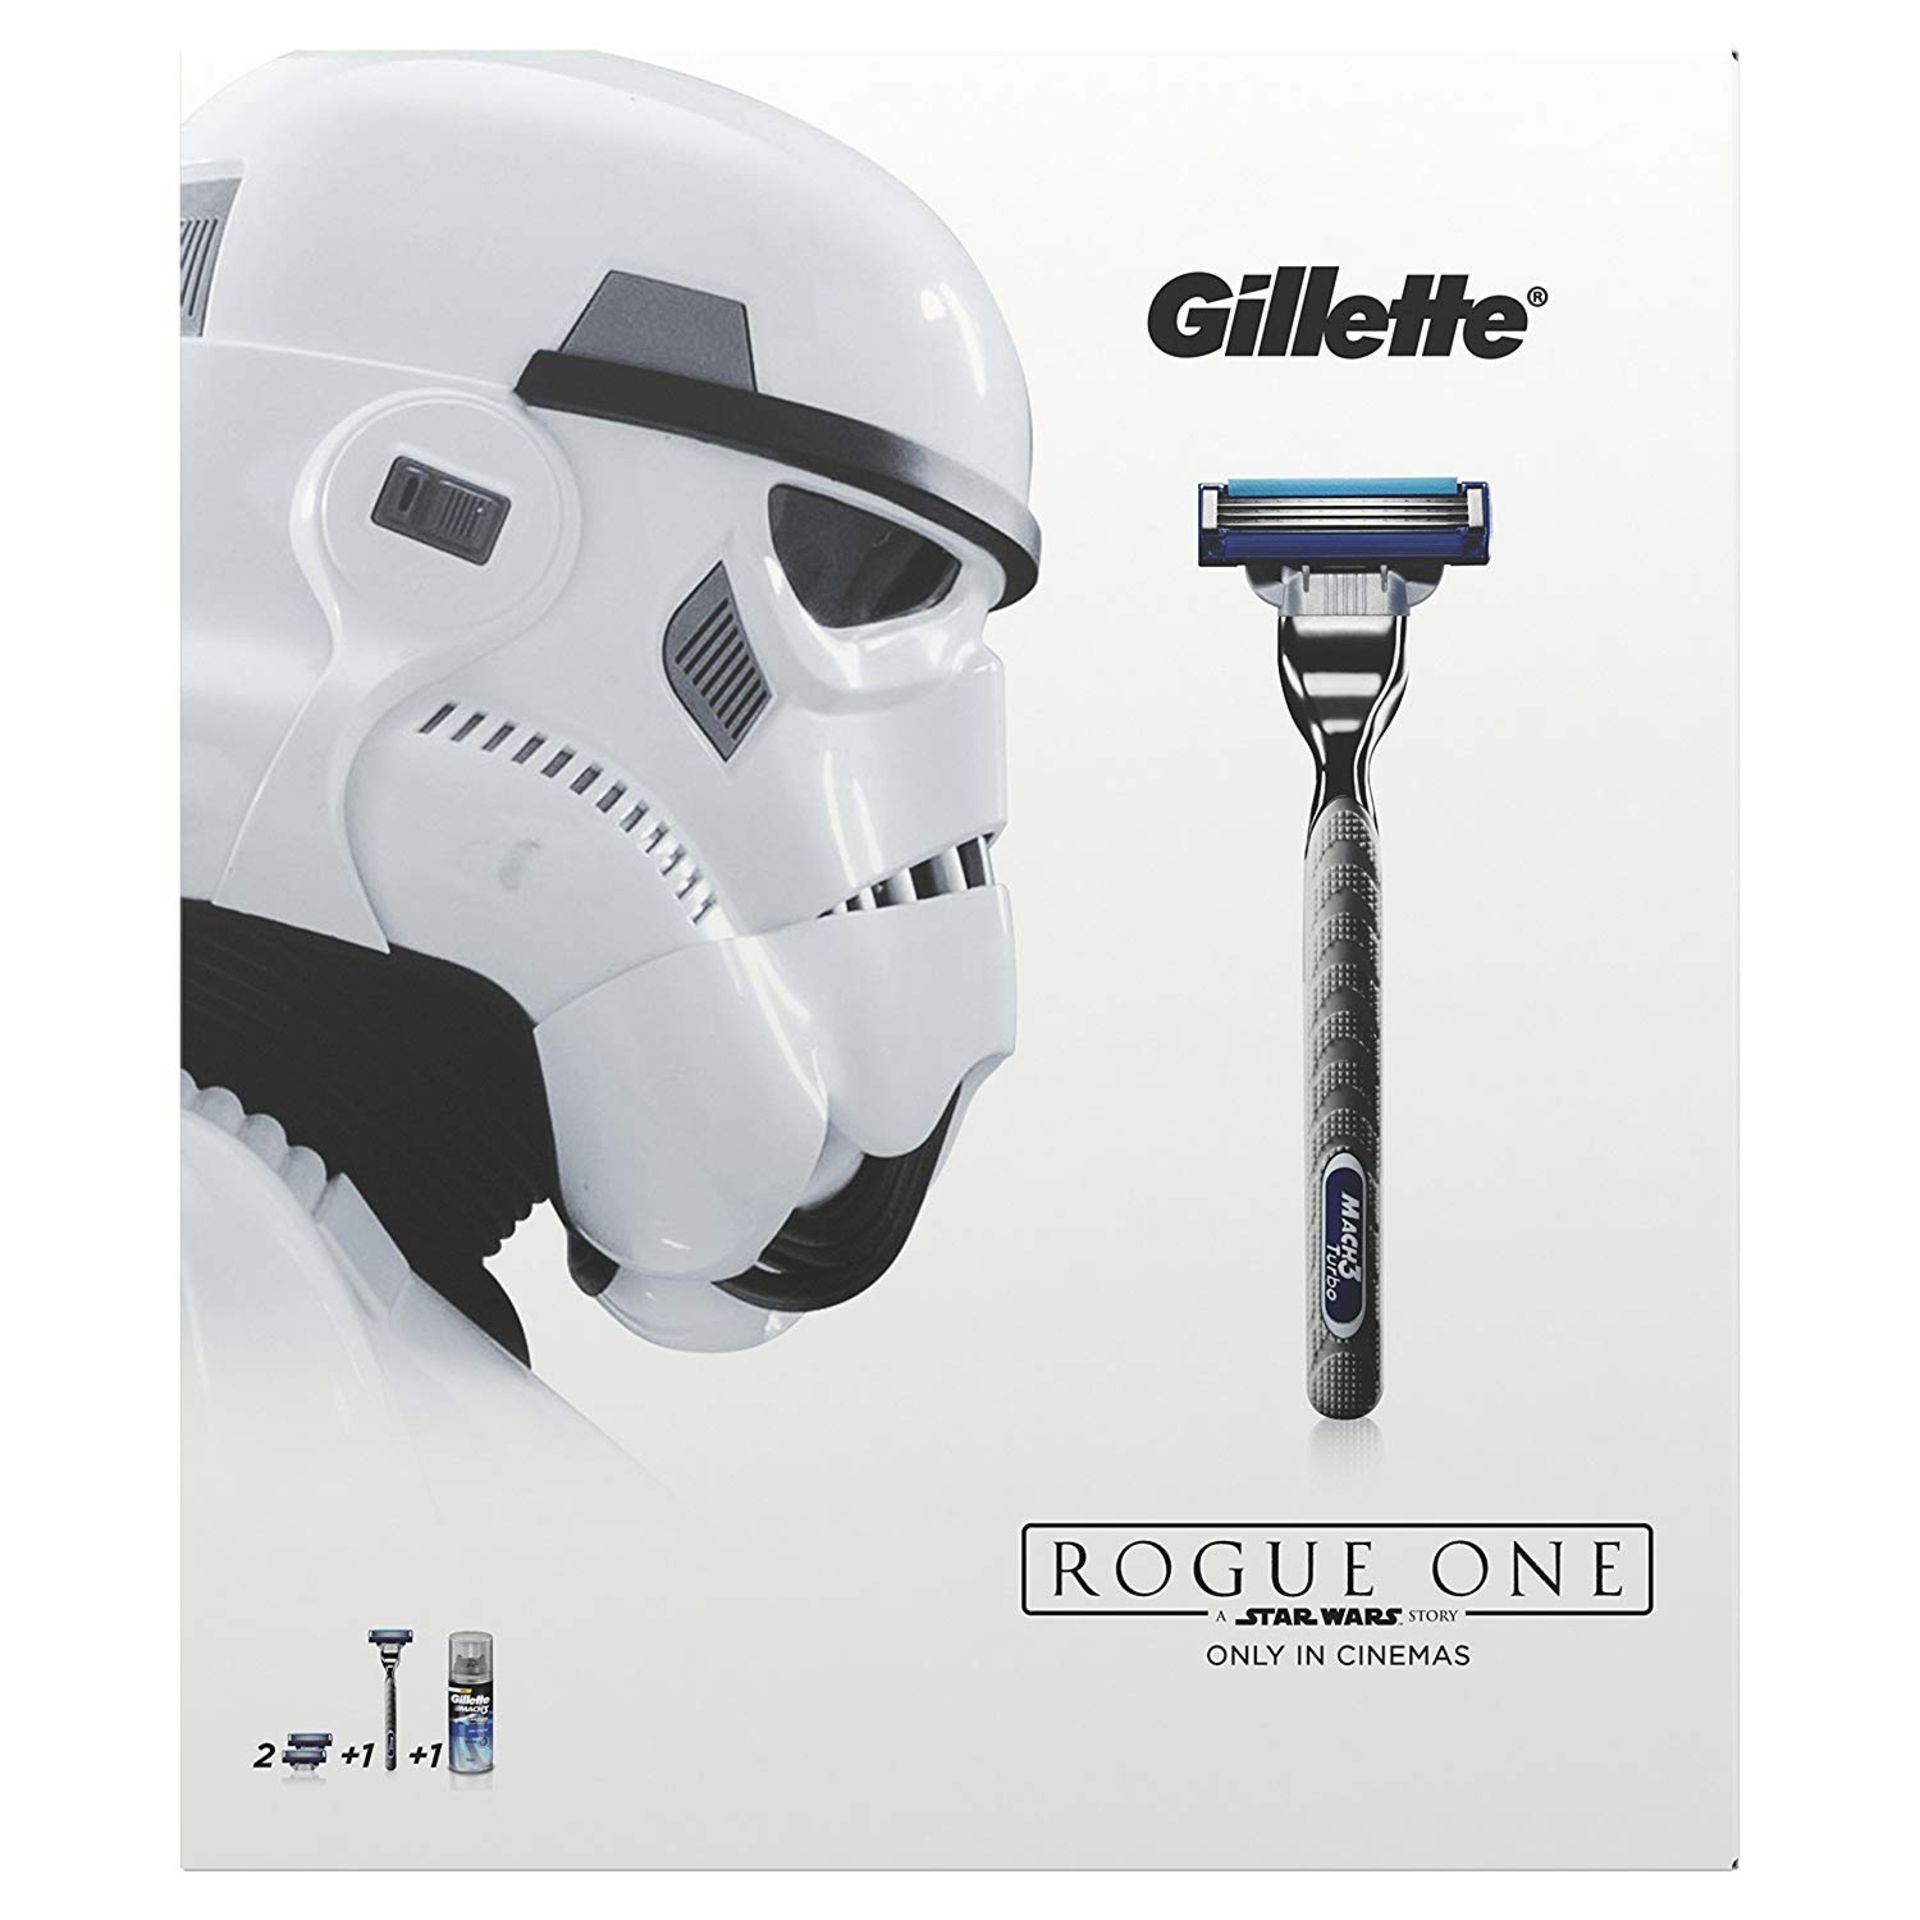 V Brand New Gillette Mach 3 Turbo Rogue One Shaving Gift Set With Extra Comfort Shave Gel + Mach 3